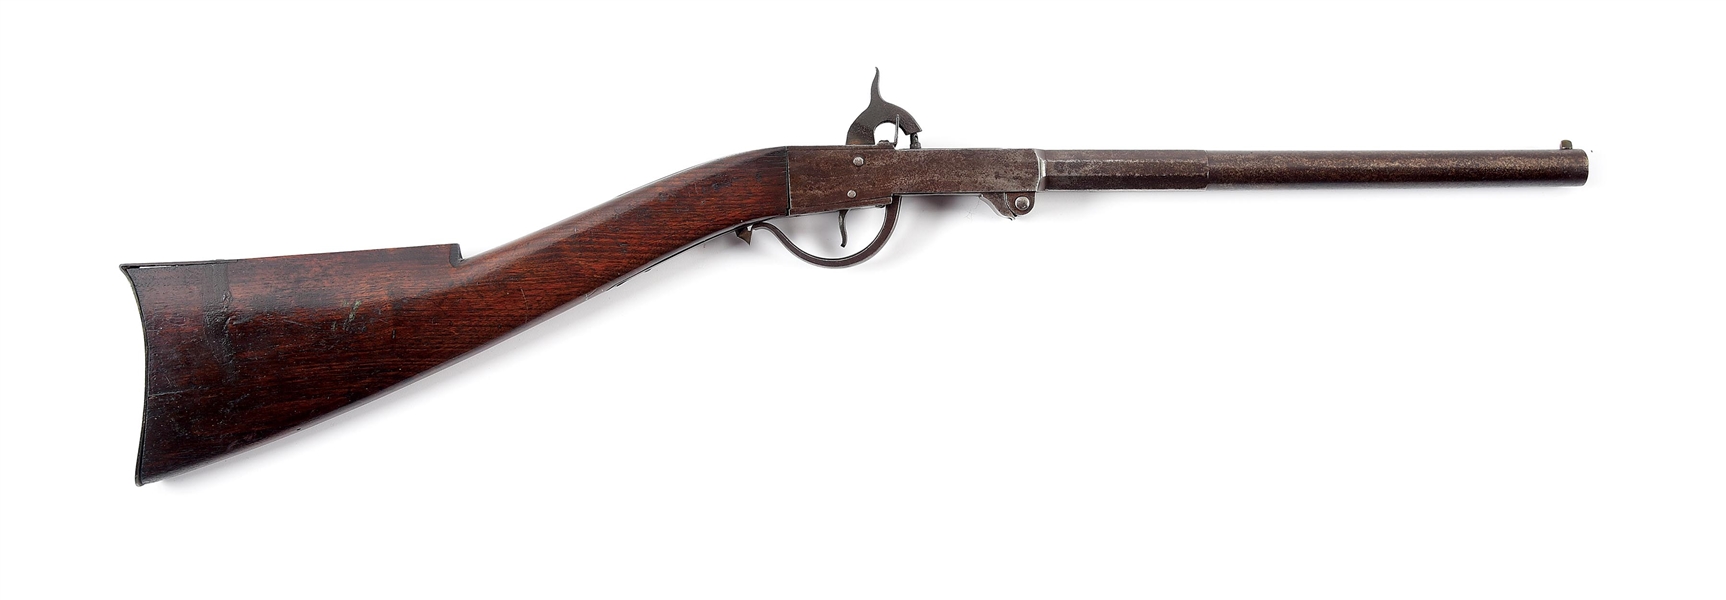 (A) JOHN RIDER PERCUSSION CARBINE WITH NAME INSCRIBED UNDER THE BUTTPLATE.